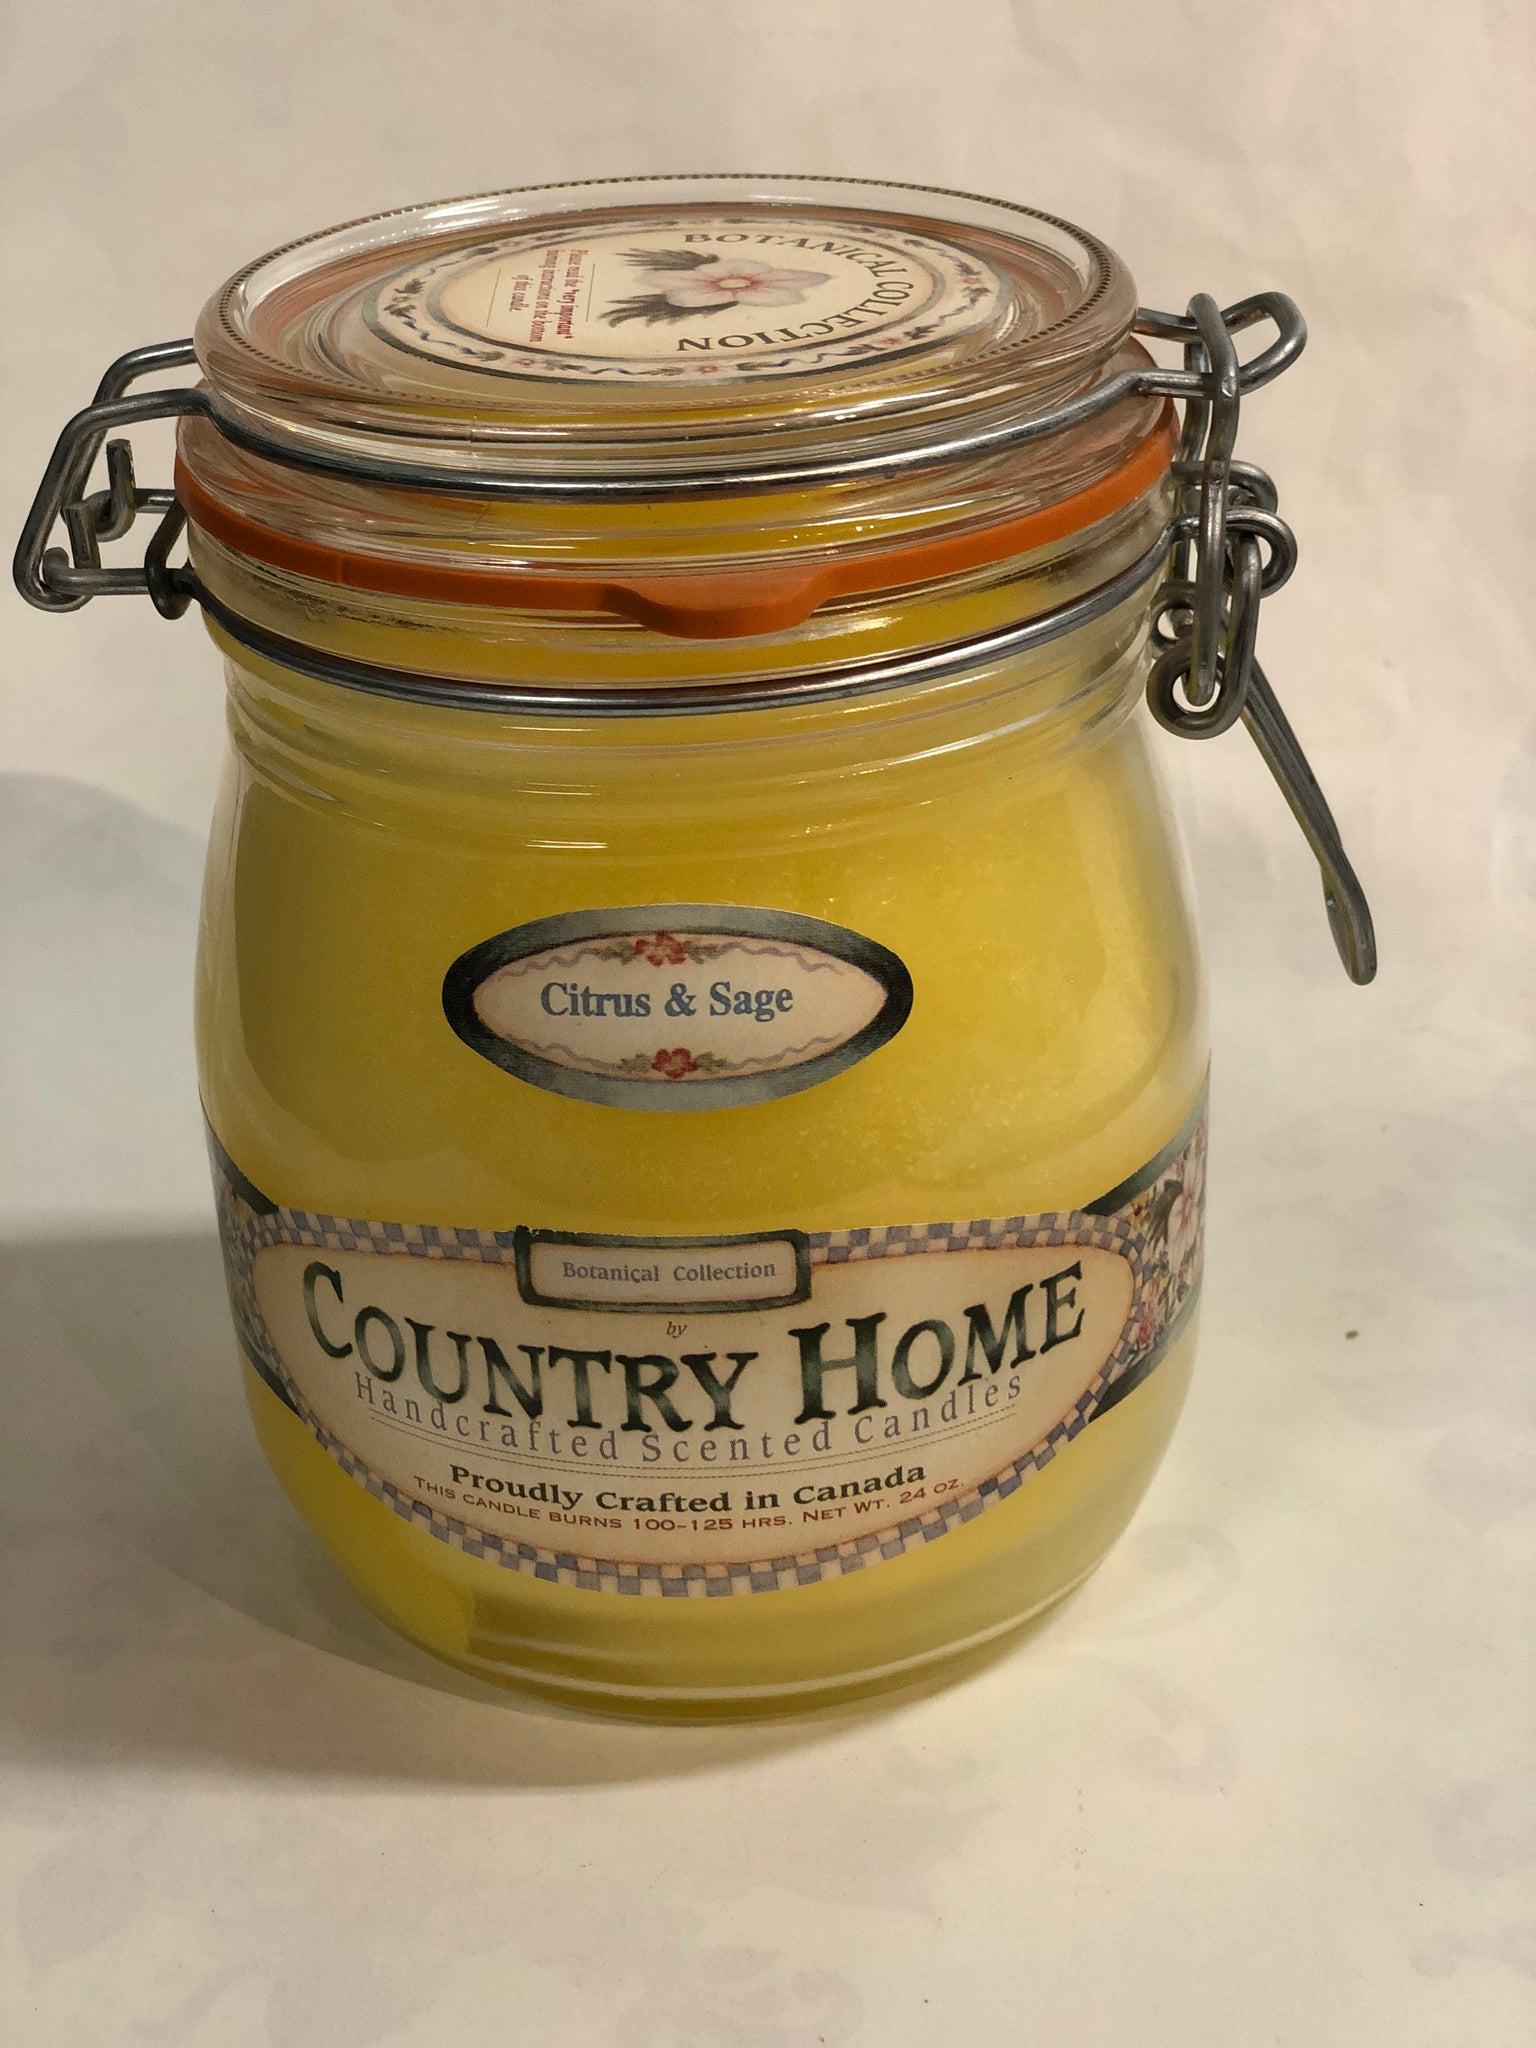 Country Home Jar Candle - Citrus & Sage